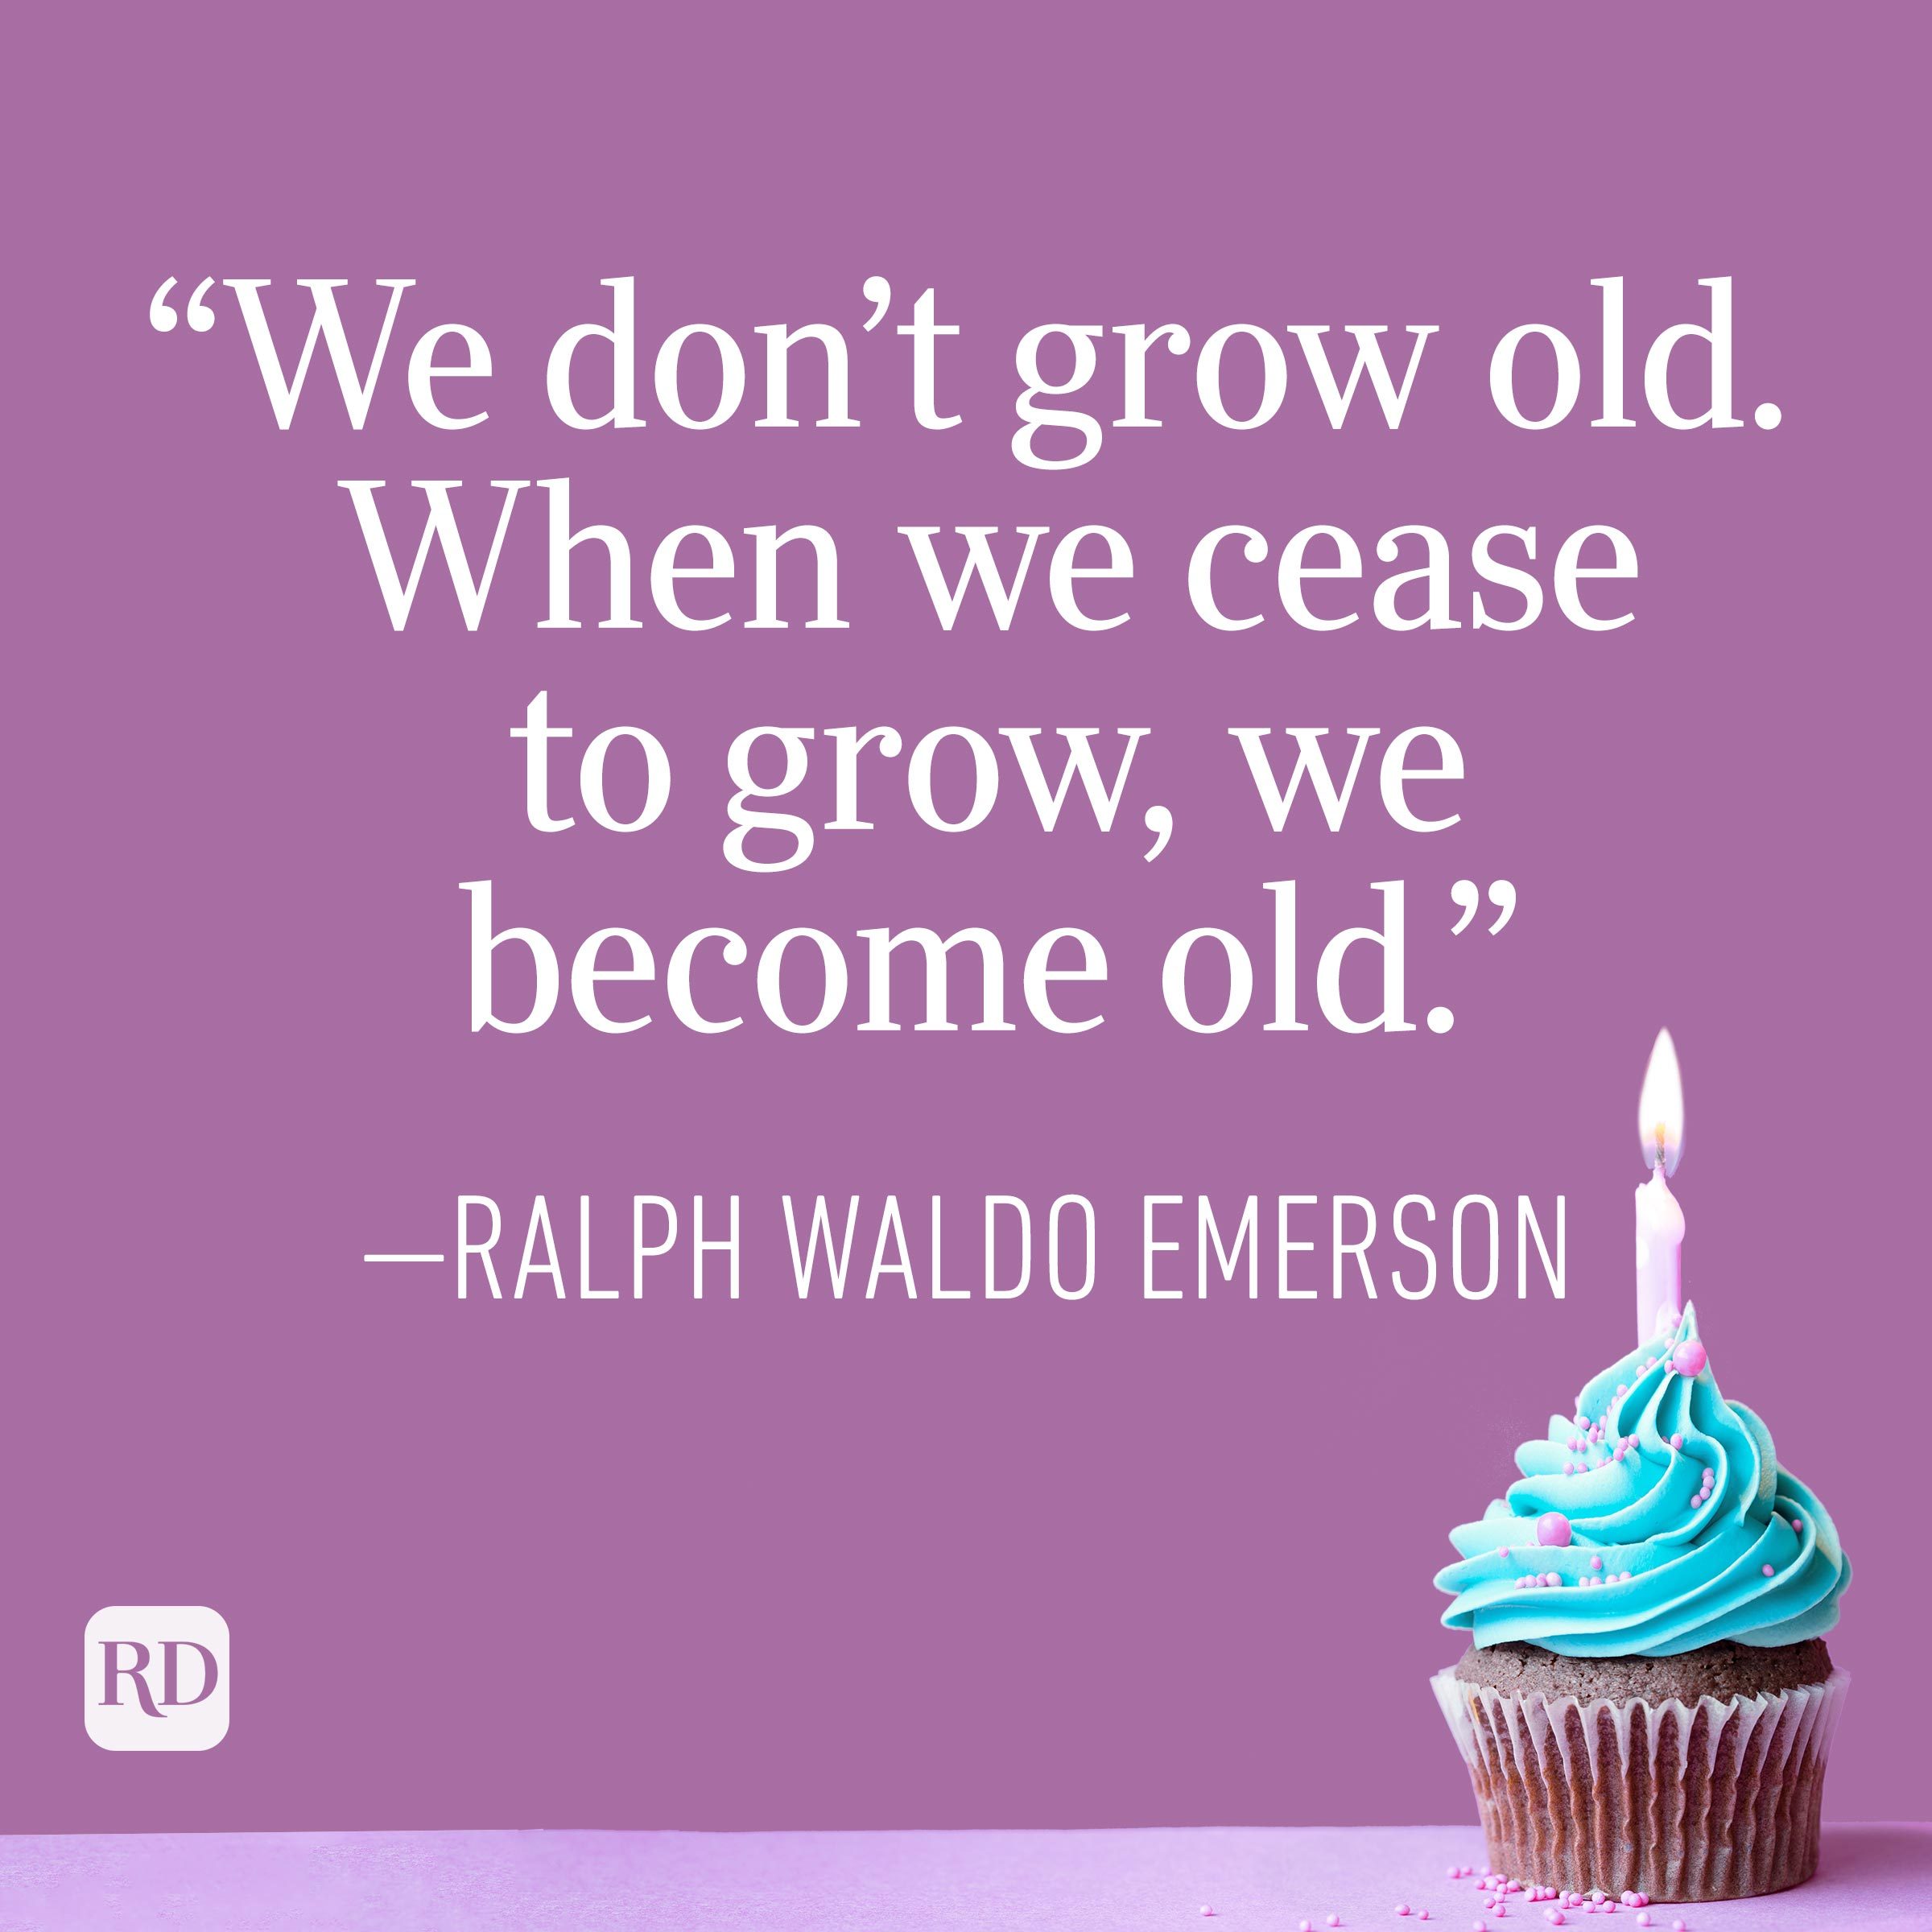 "We don't grow old. When we cease to grow, we become old." —Ralph Waldo Emerson